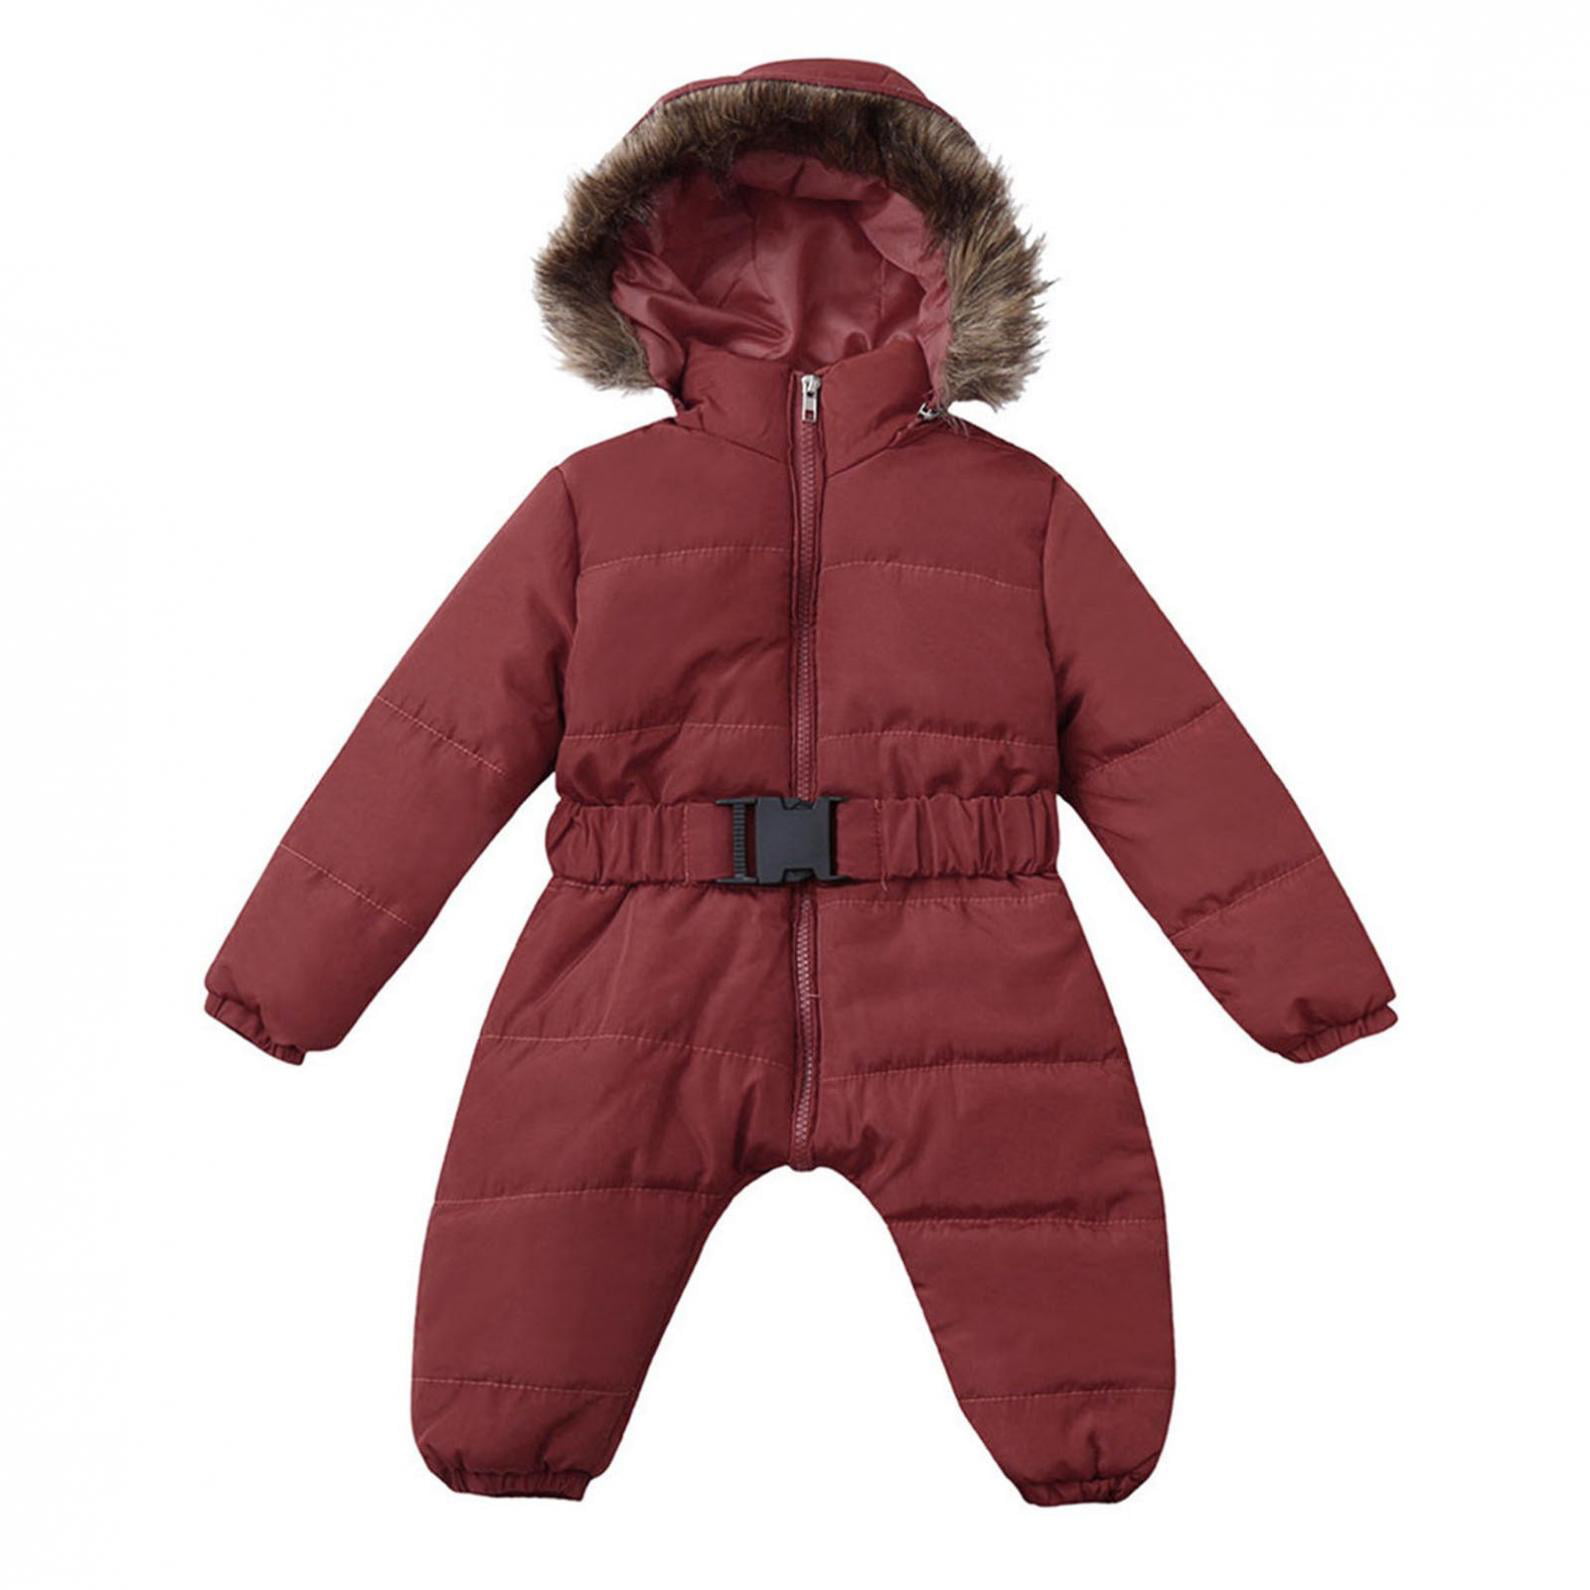 Fstyle Infant Newborn Baby Girls Boys Bear Warm Thick Snowsuit Hooded Coat Jumpsuit Baby Clothes for Girls Boys 0 Months-24 Months